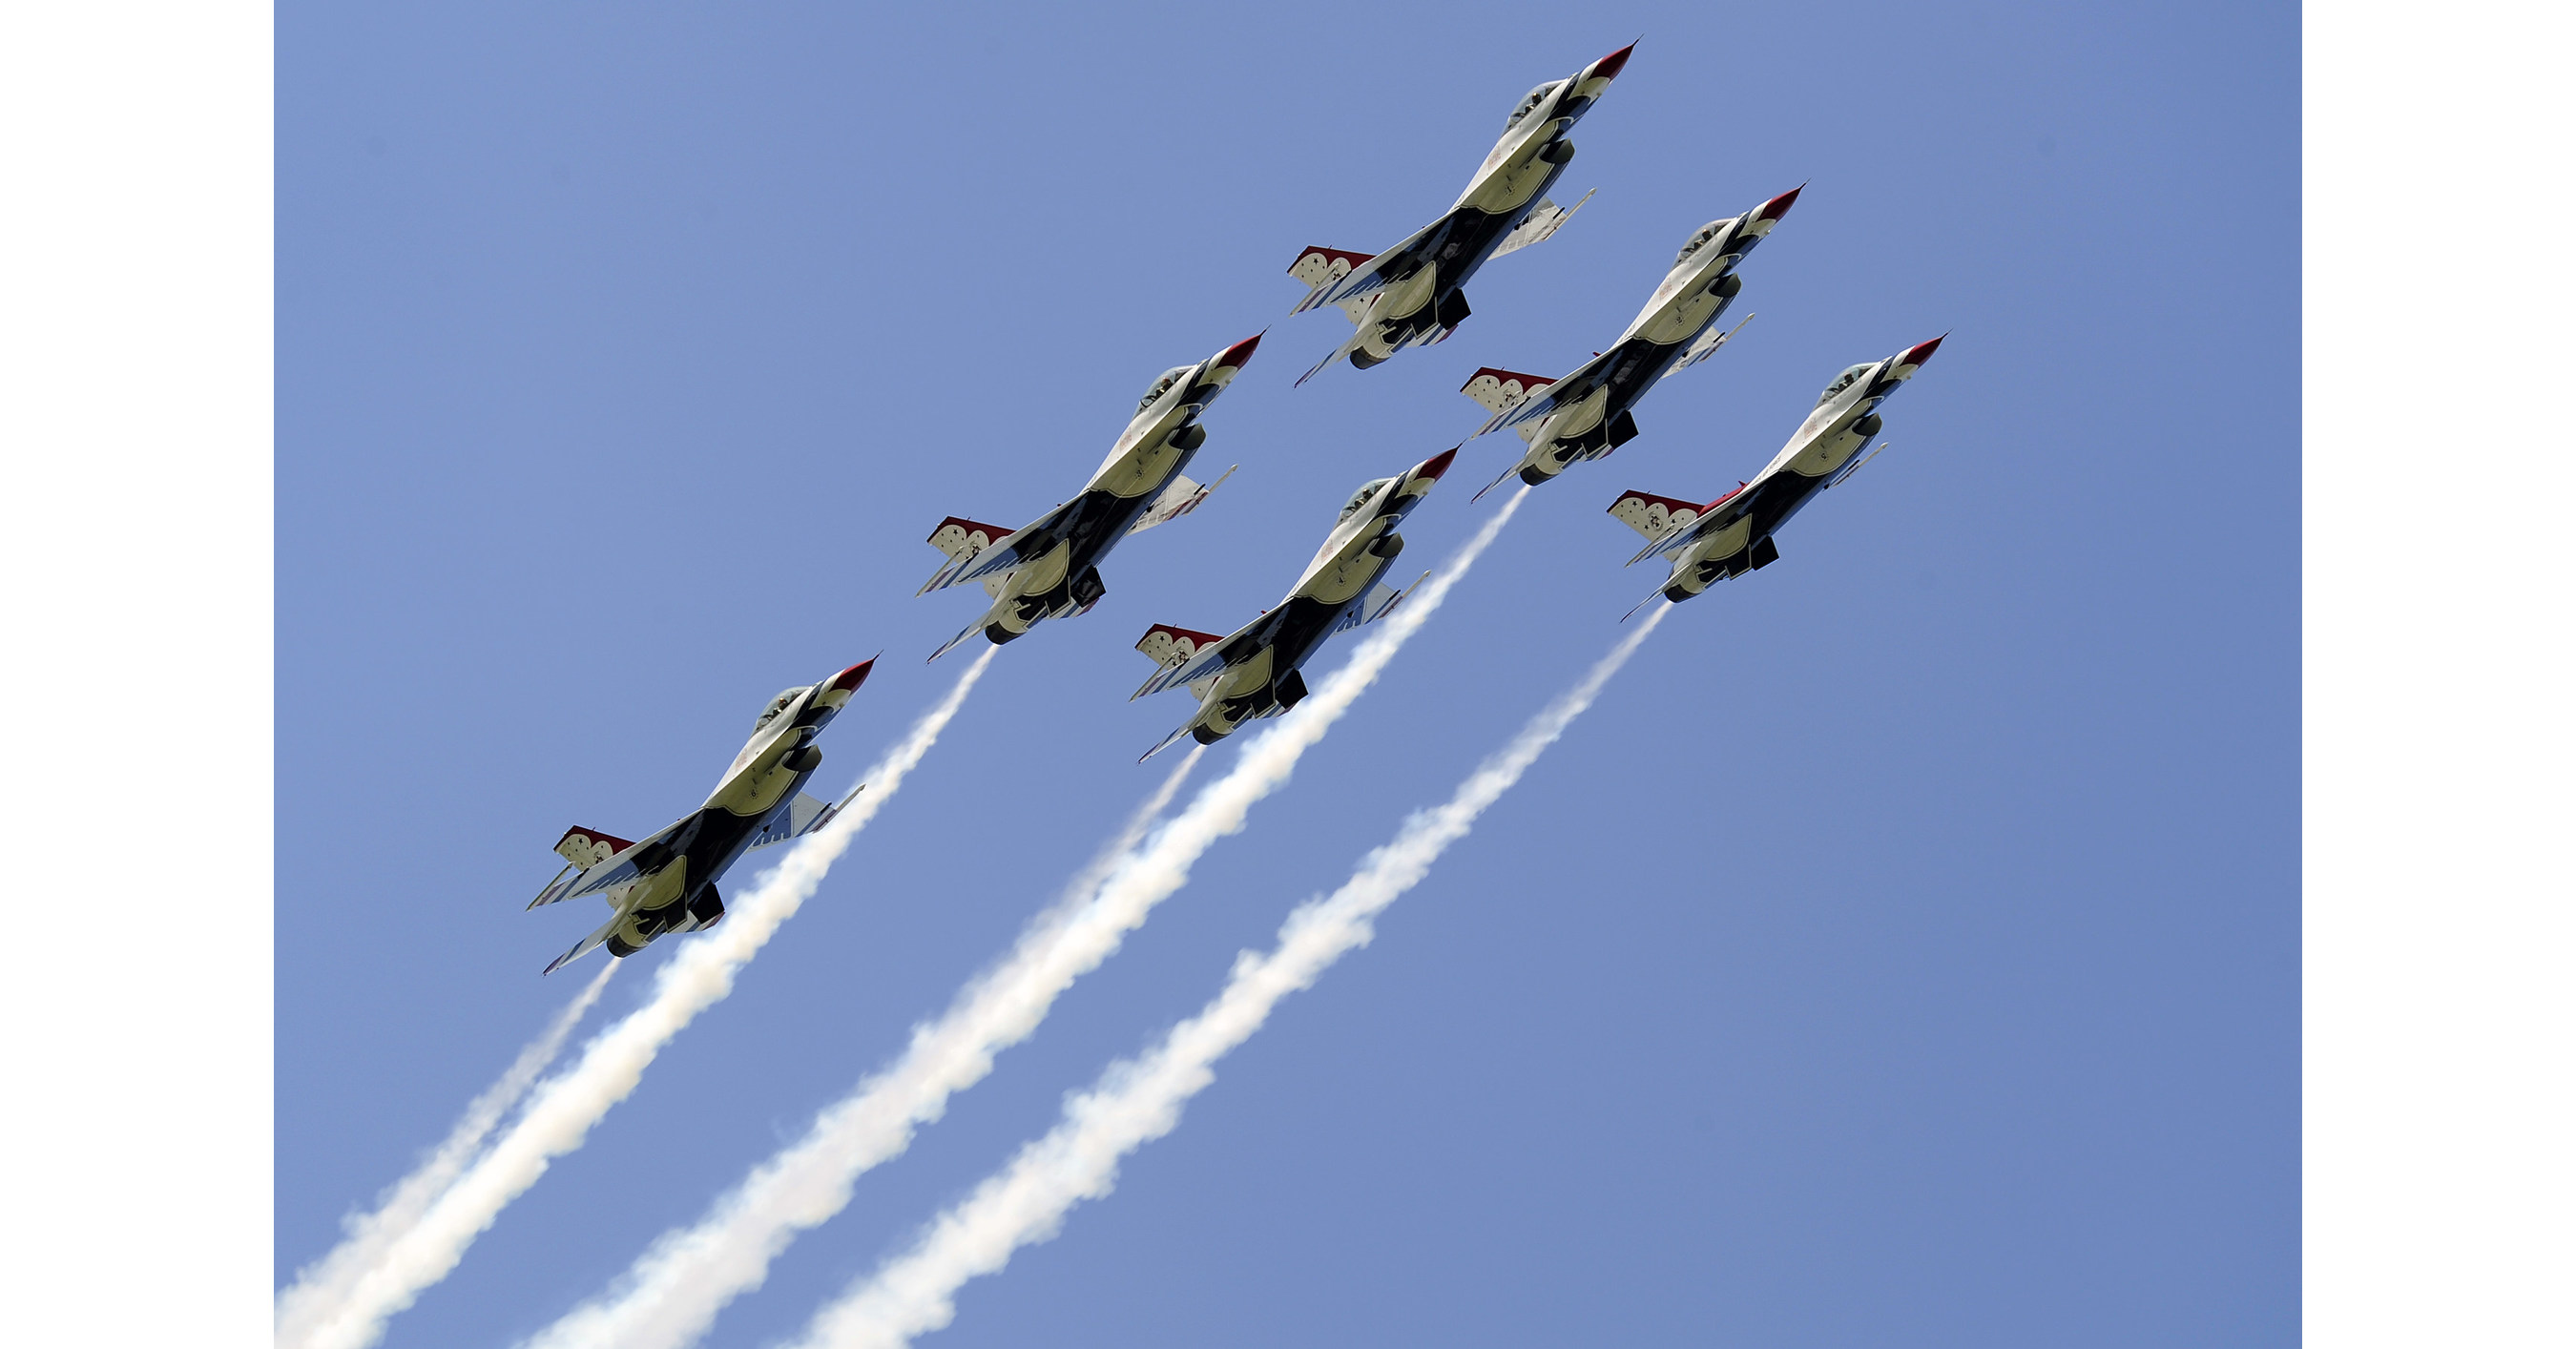 "One of the World's Best Air Shows" Coming to Goldsboro, NC